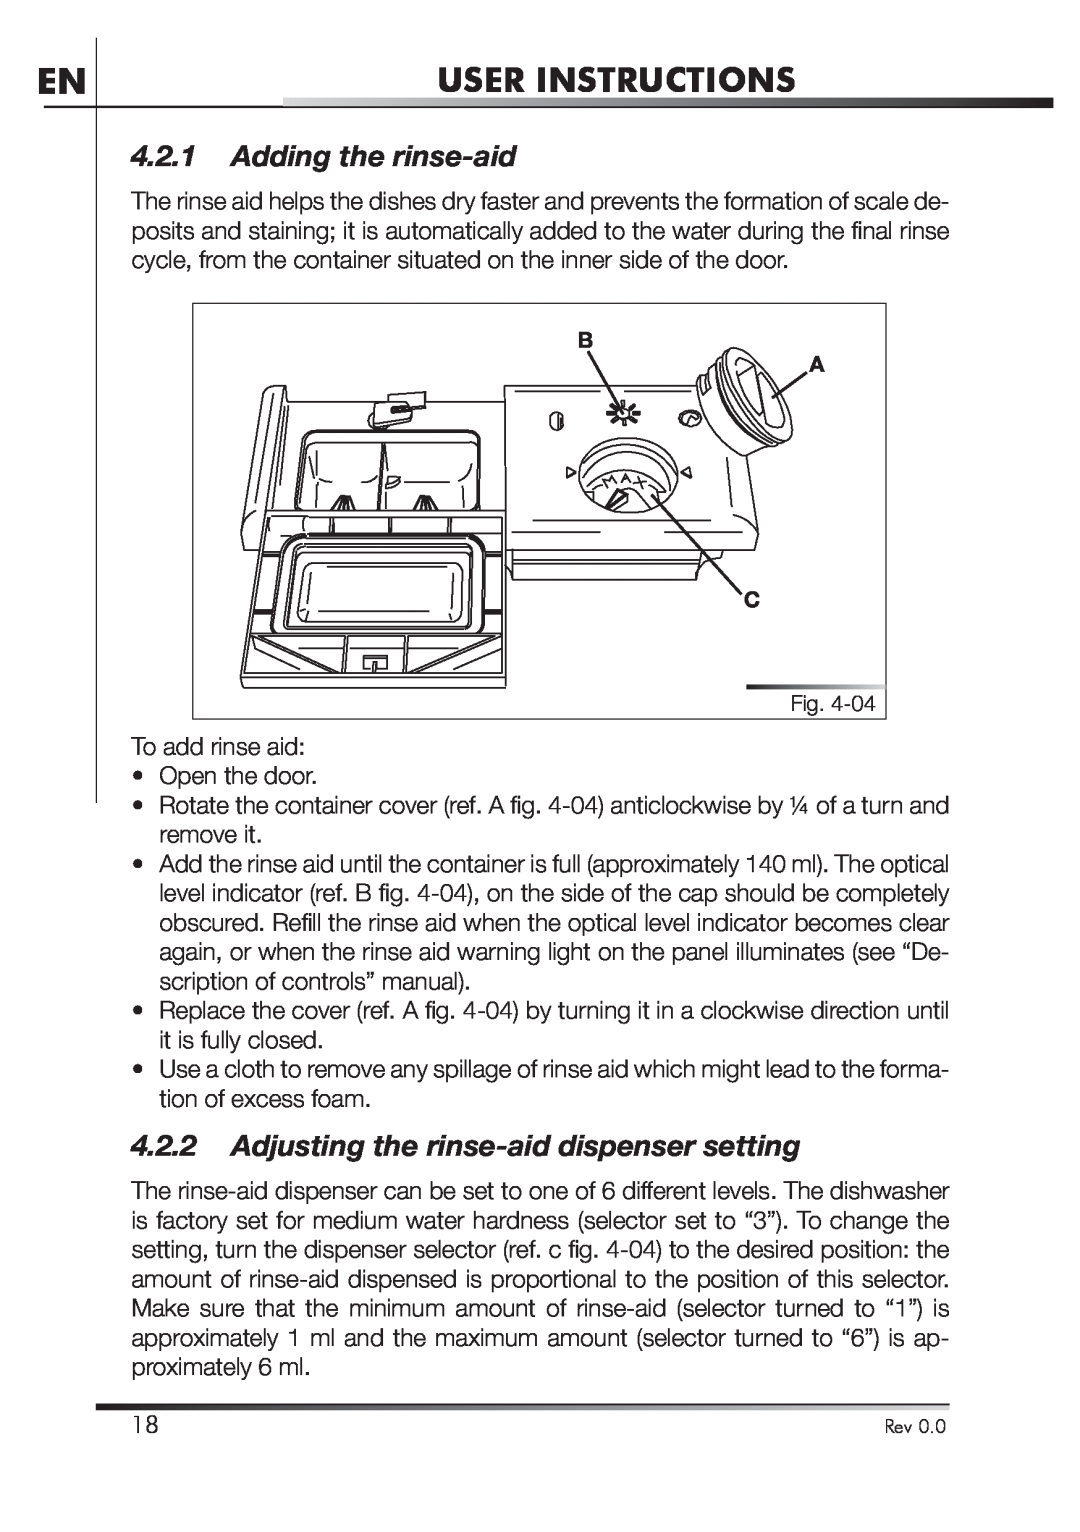 Smeg STA4645 instruction manual Adding the rinse-aid, Adjusting the rinse-aid dispenser setting, User Instructions 